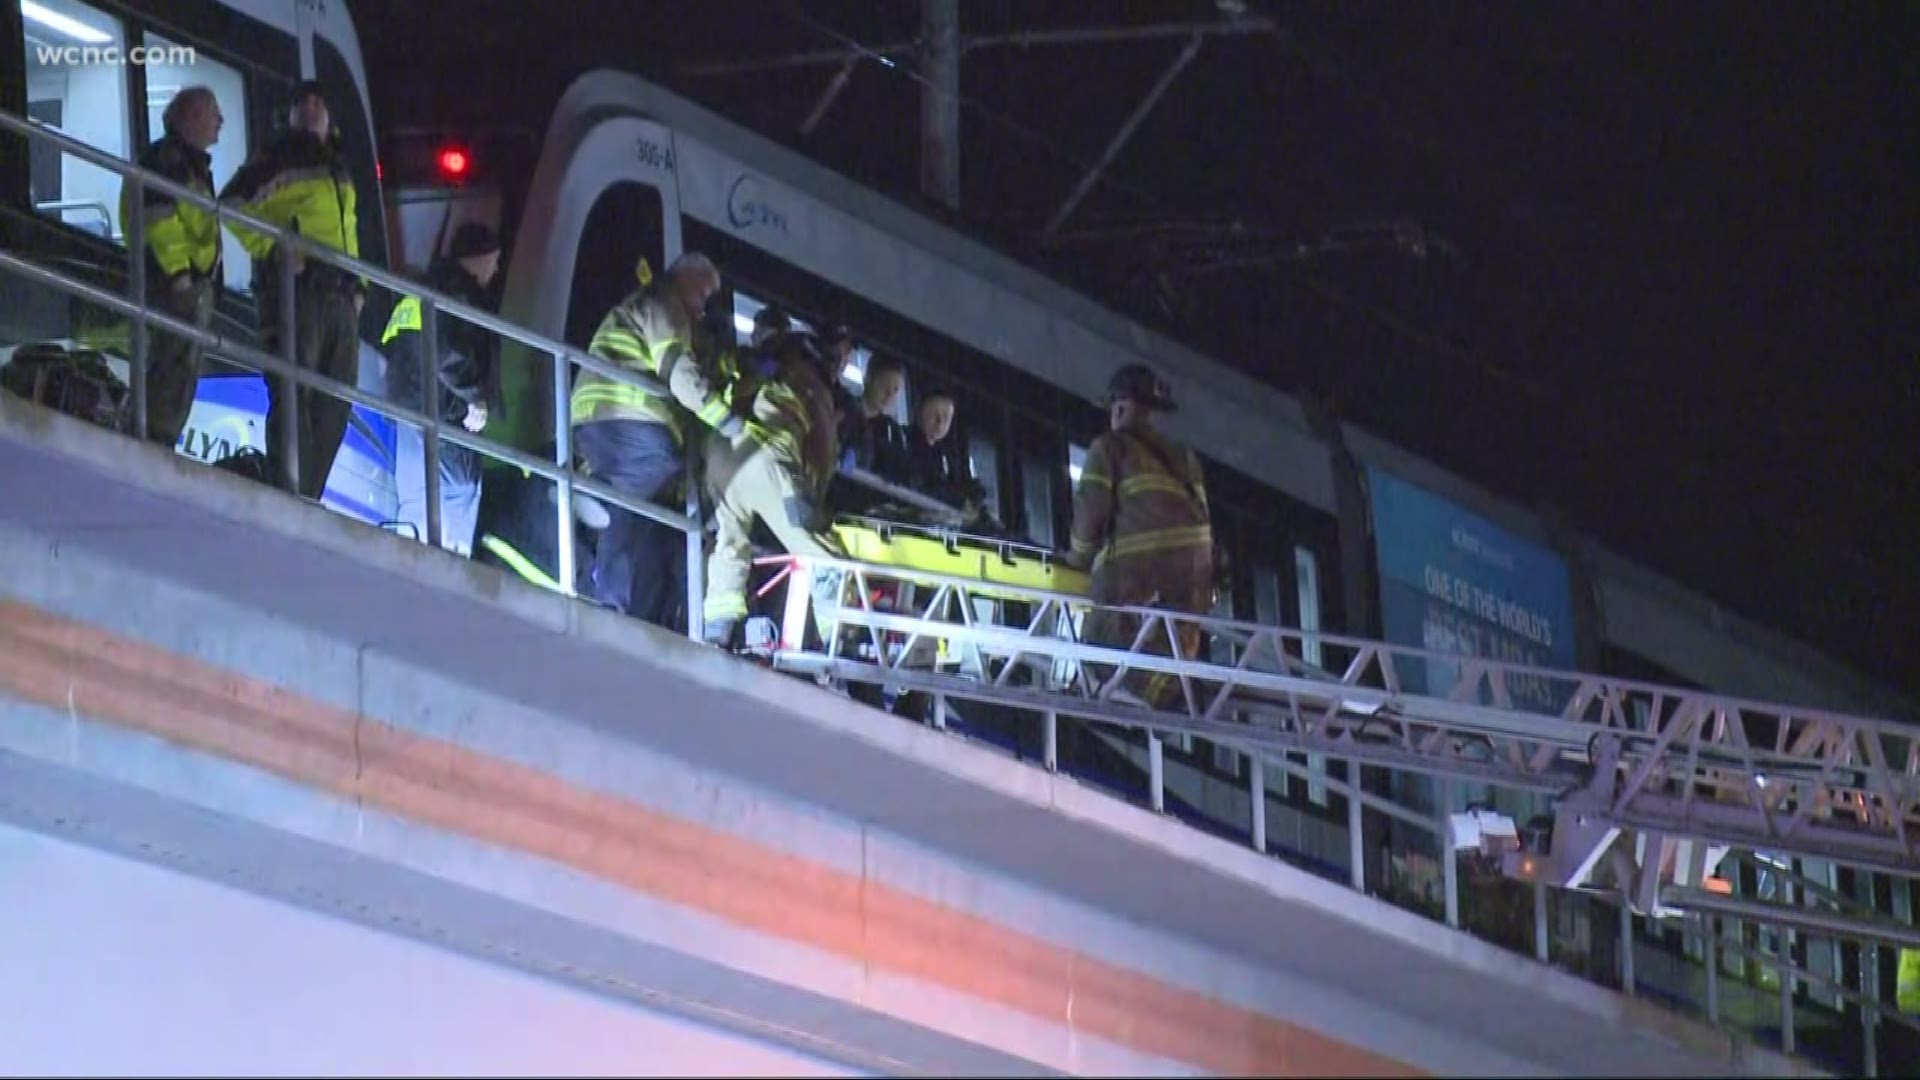 A man was rescued by firefighters after he was hit by a light rail train in South End early Monday morning.